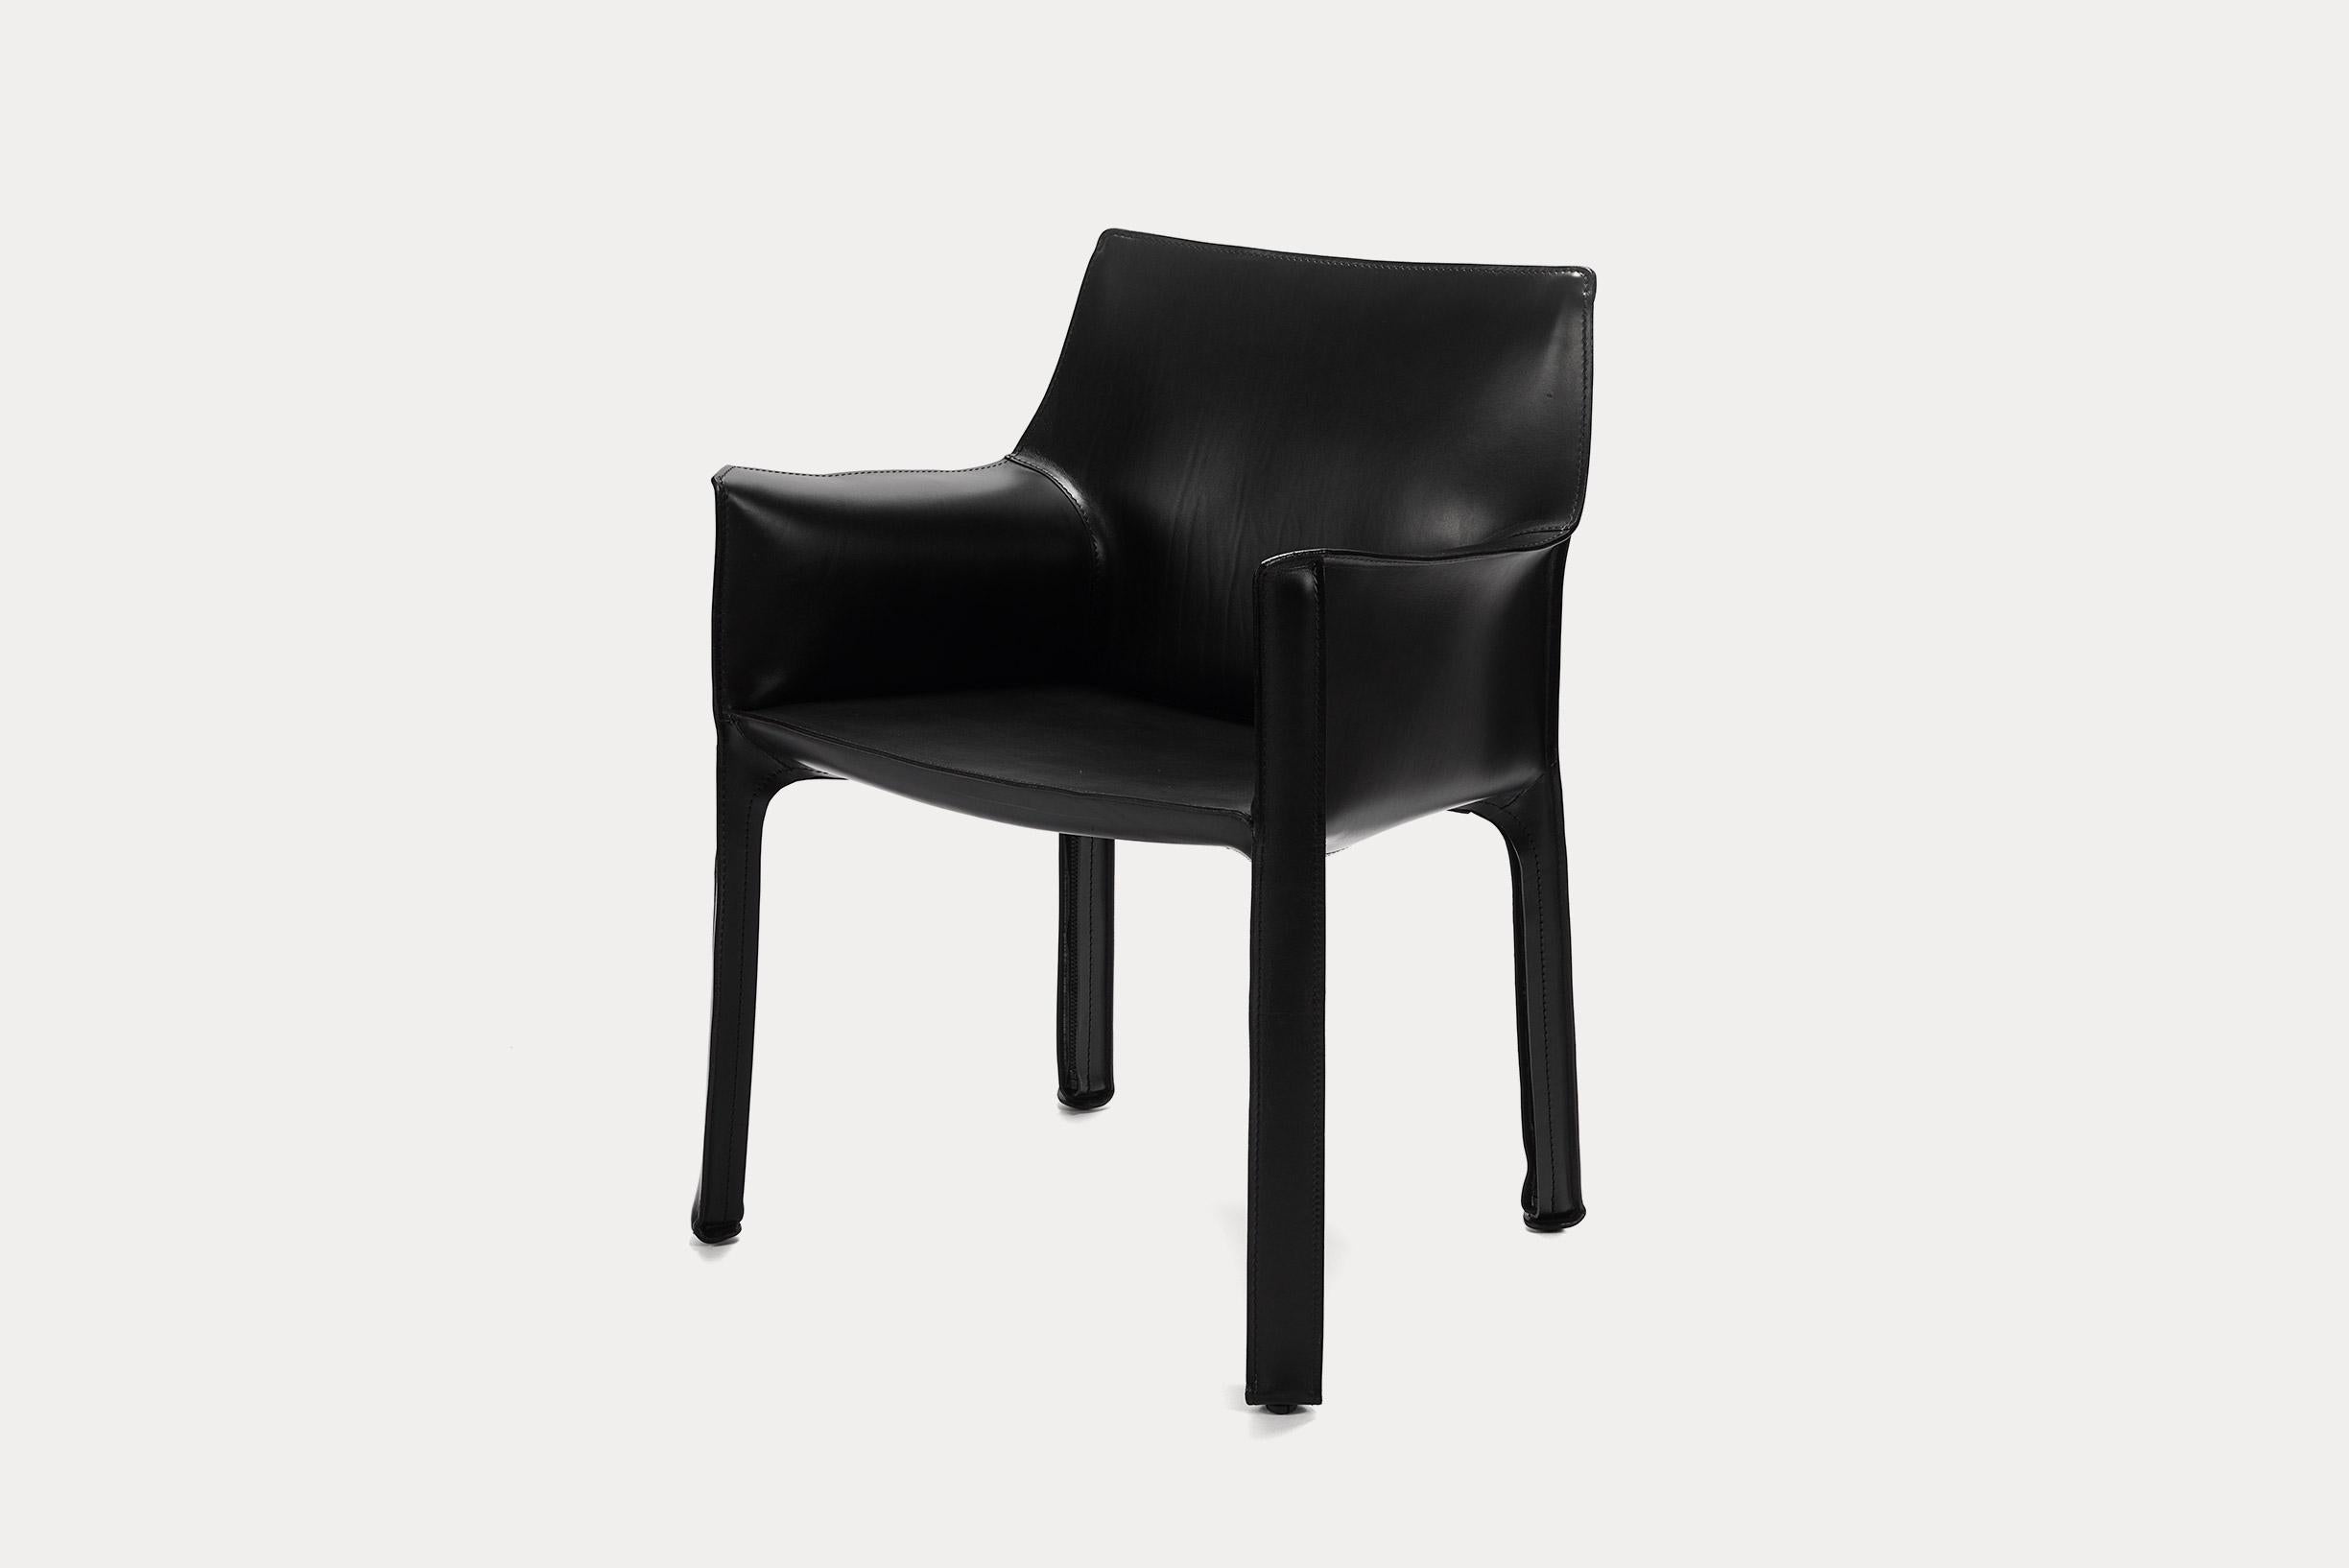 Cab was conceived by the architect Mario Bellini in 1977, as an extension and prosthesis for the body: A skeleton in tubular steel and stretched, stitched leather, fastened to the frame with four zips. This chair is in black saddle leather. Cab is